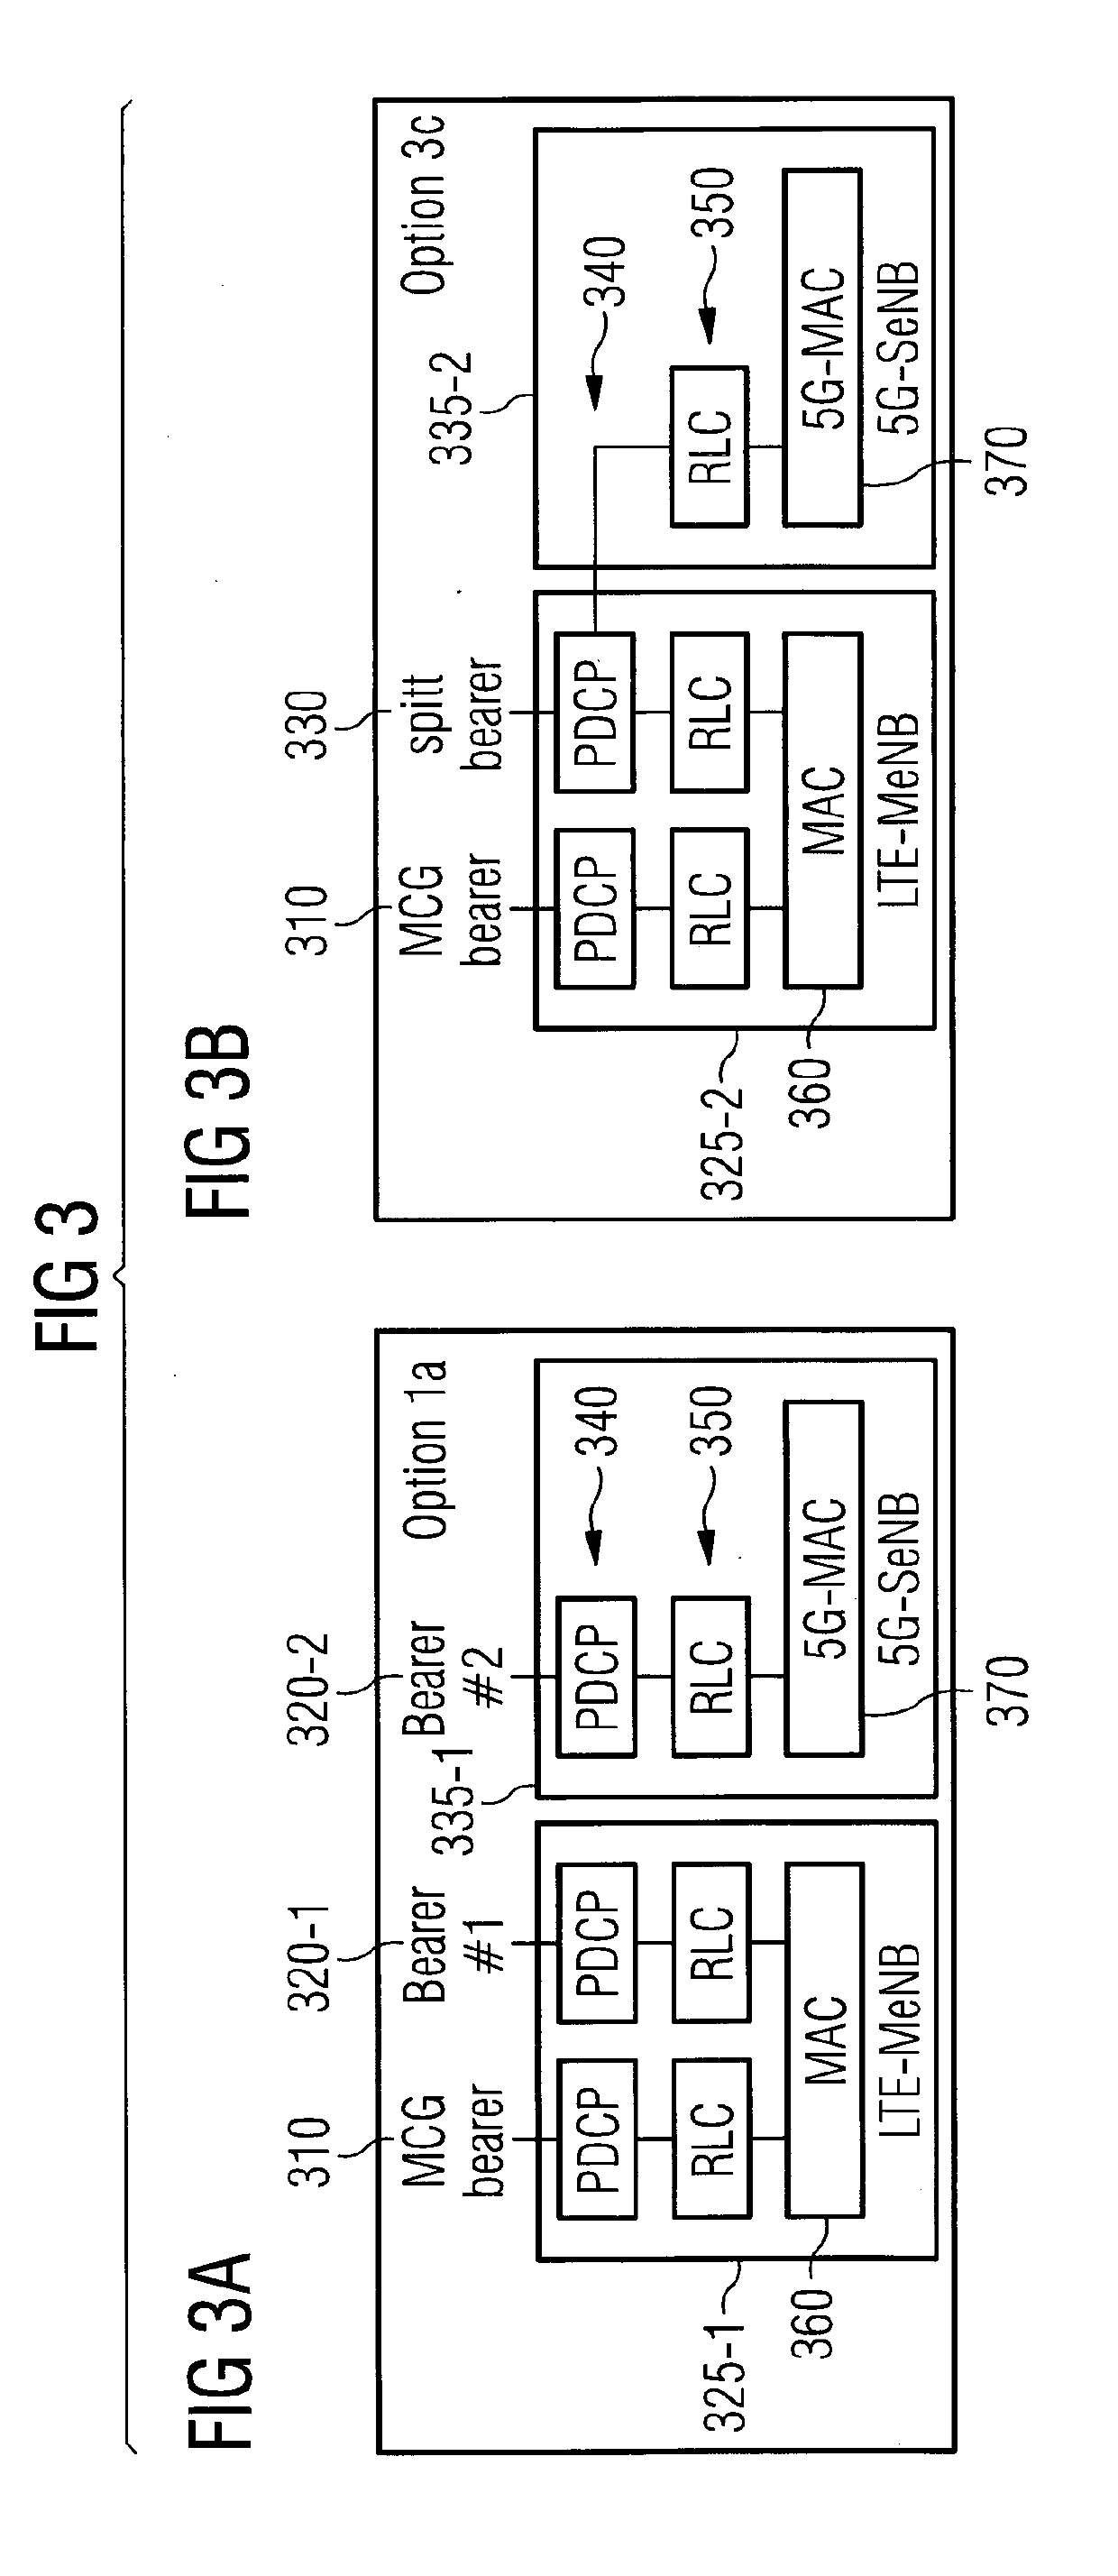 Implementing Radio Access Network Slicing in a Mobile Network